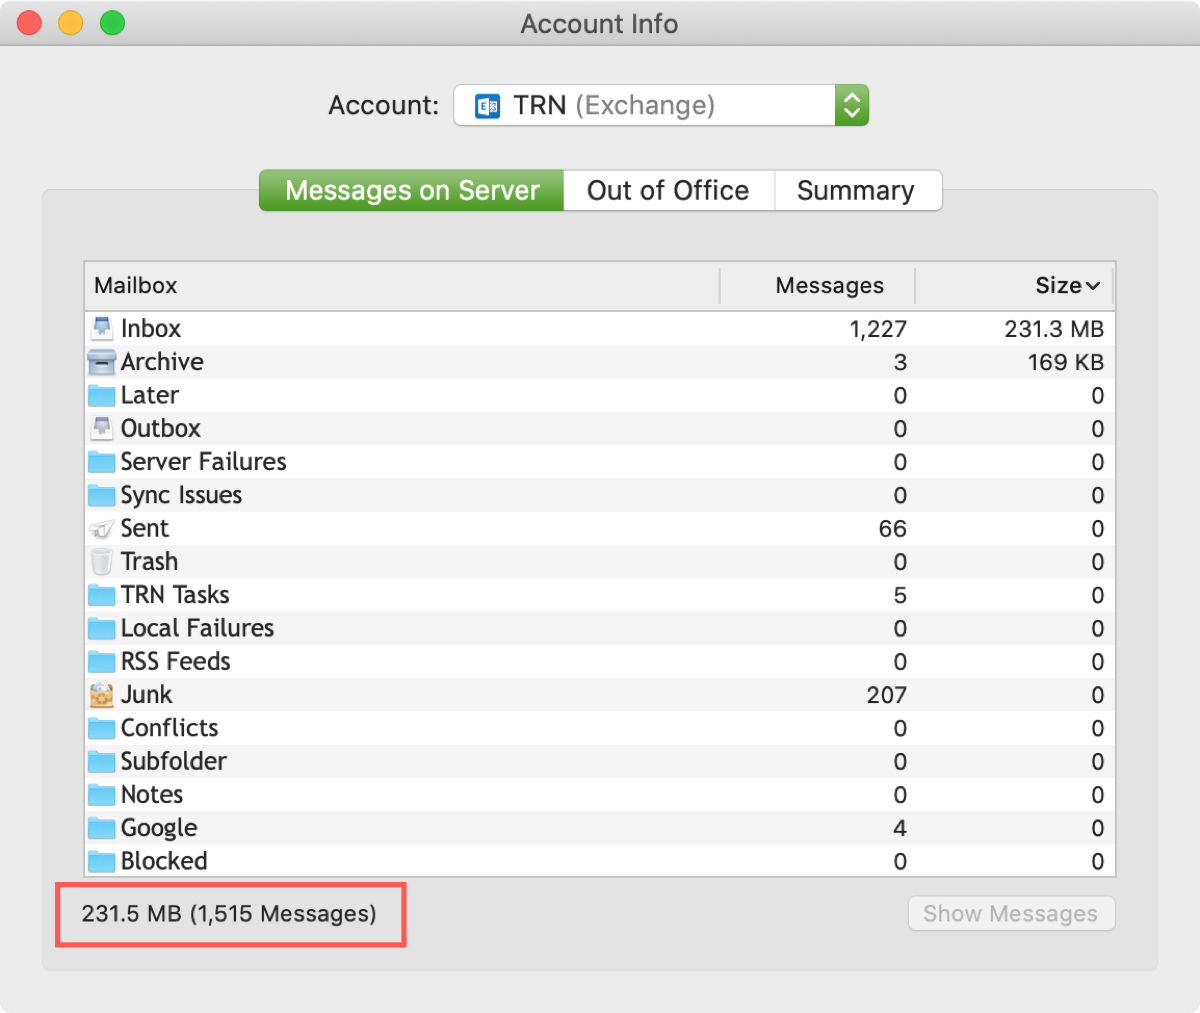 How To Check The Quota Limits For Available Storage Space In Mail On Mac